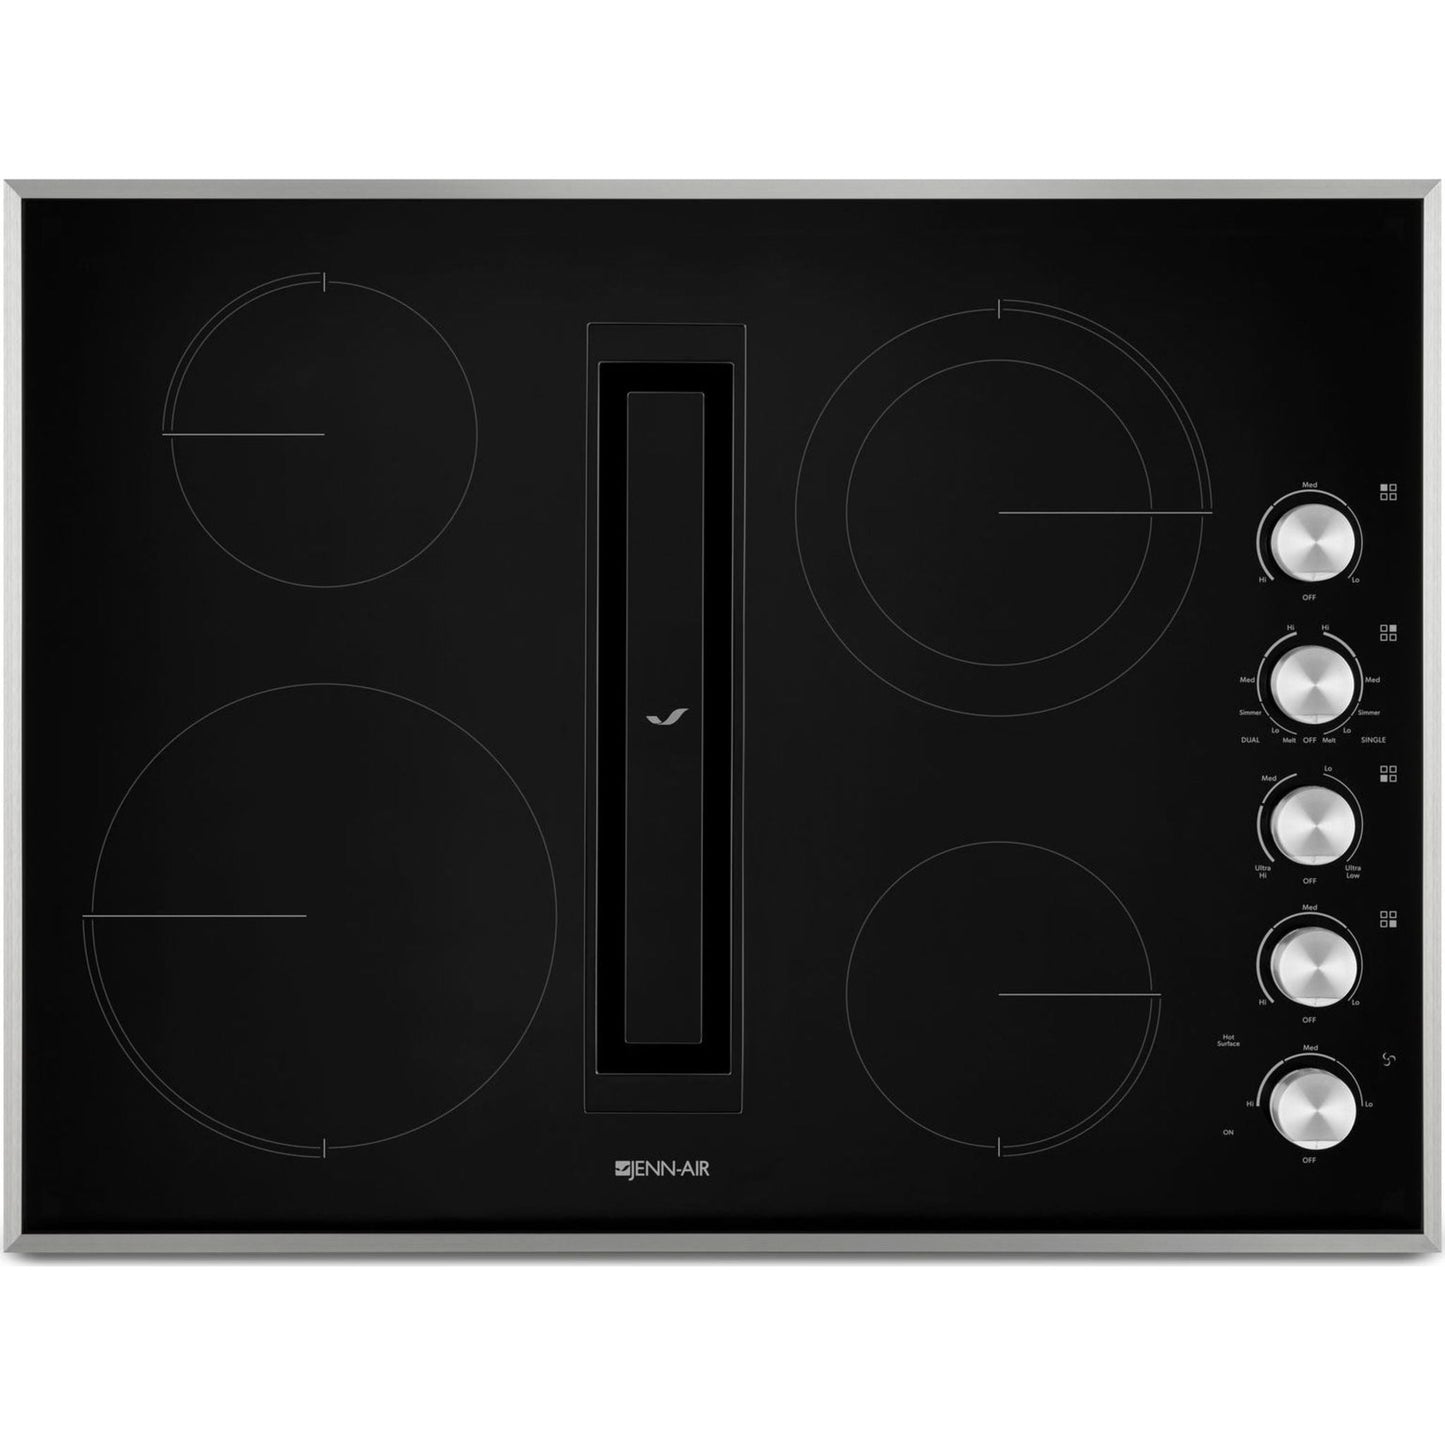 JennAir 30" Cooktop (JED3430GS) - Stainless Steel